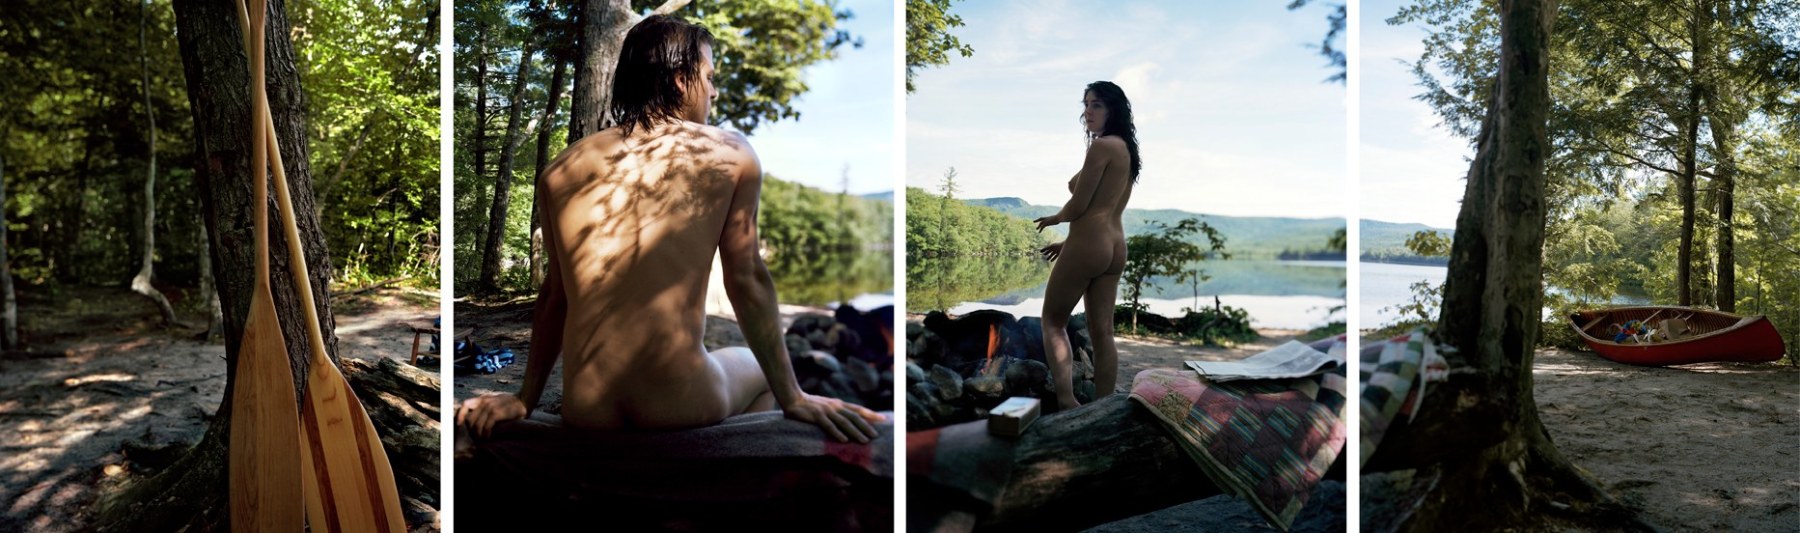 Between Bodies, 2009. Four-panel archival pigment print, available as&nbsp;24 x 80 or 40 x 120 inches.&nbsp;